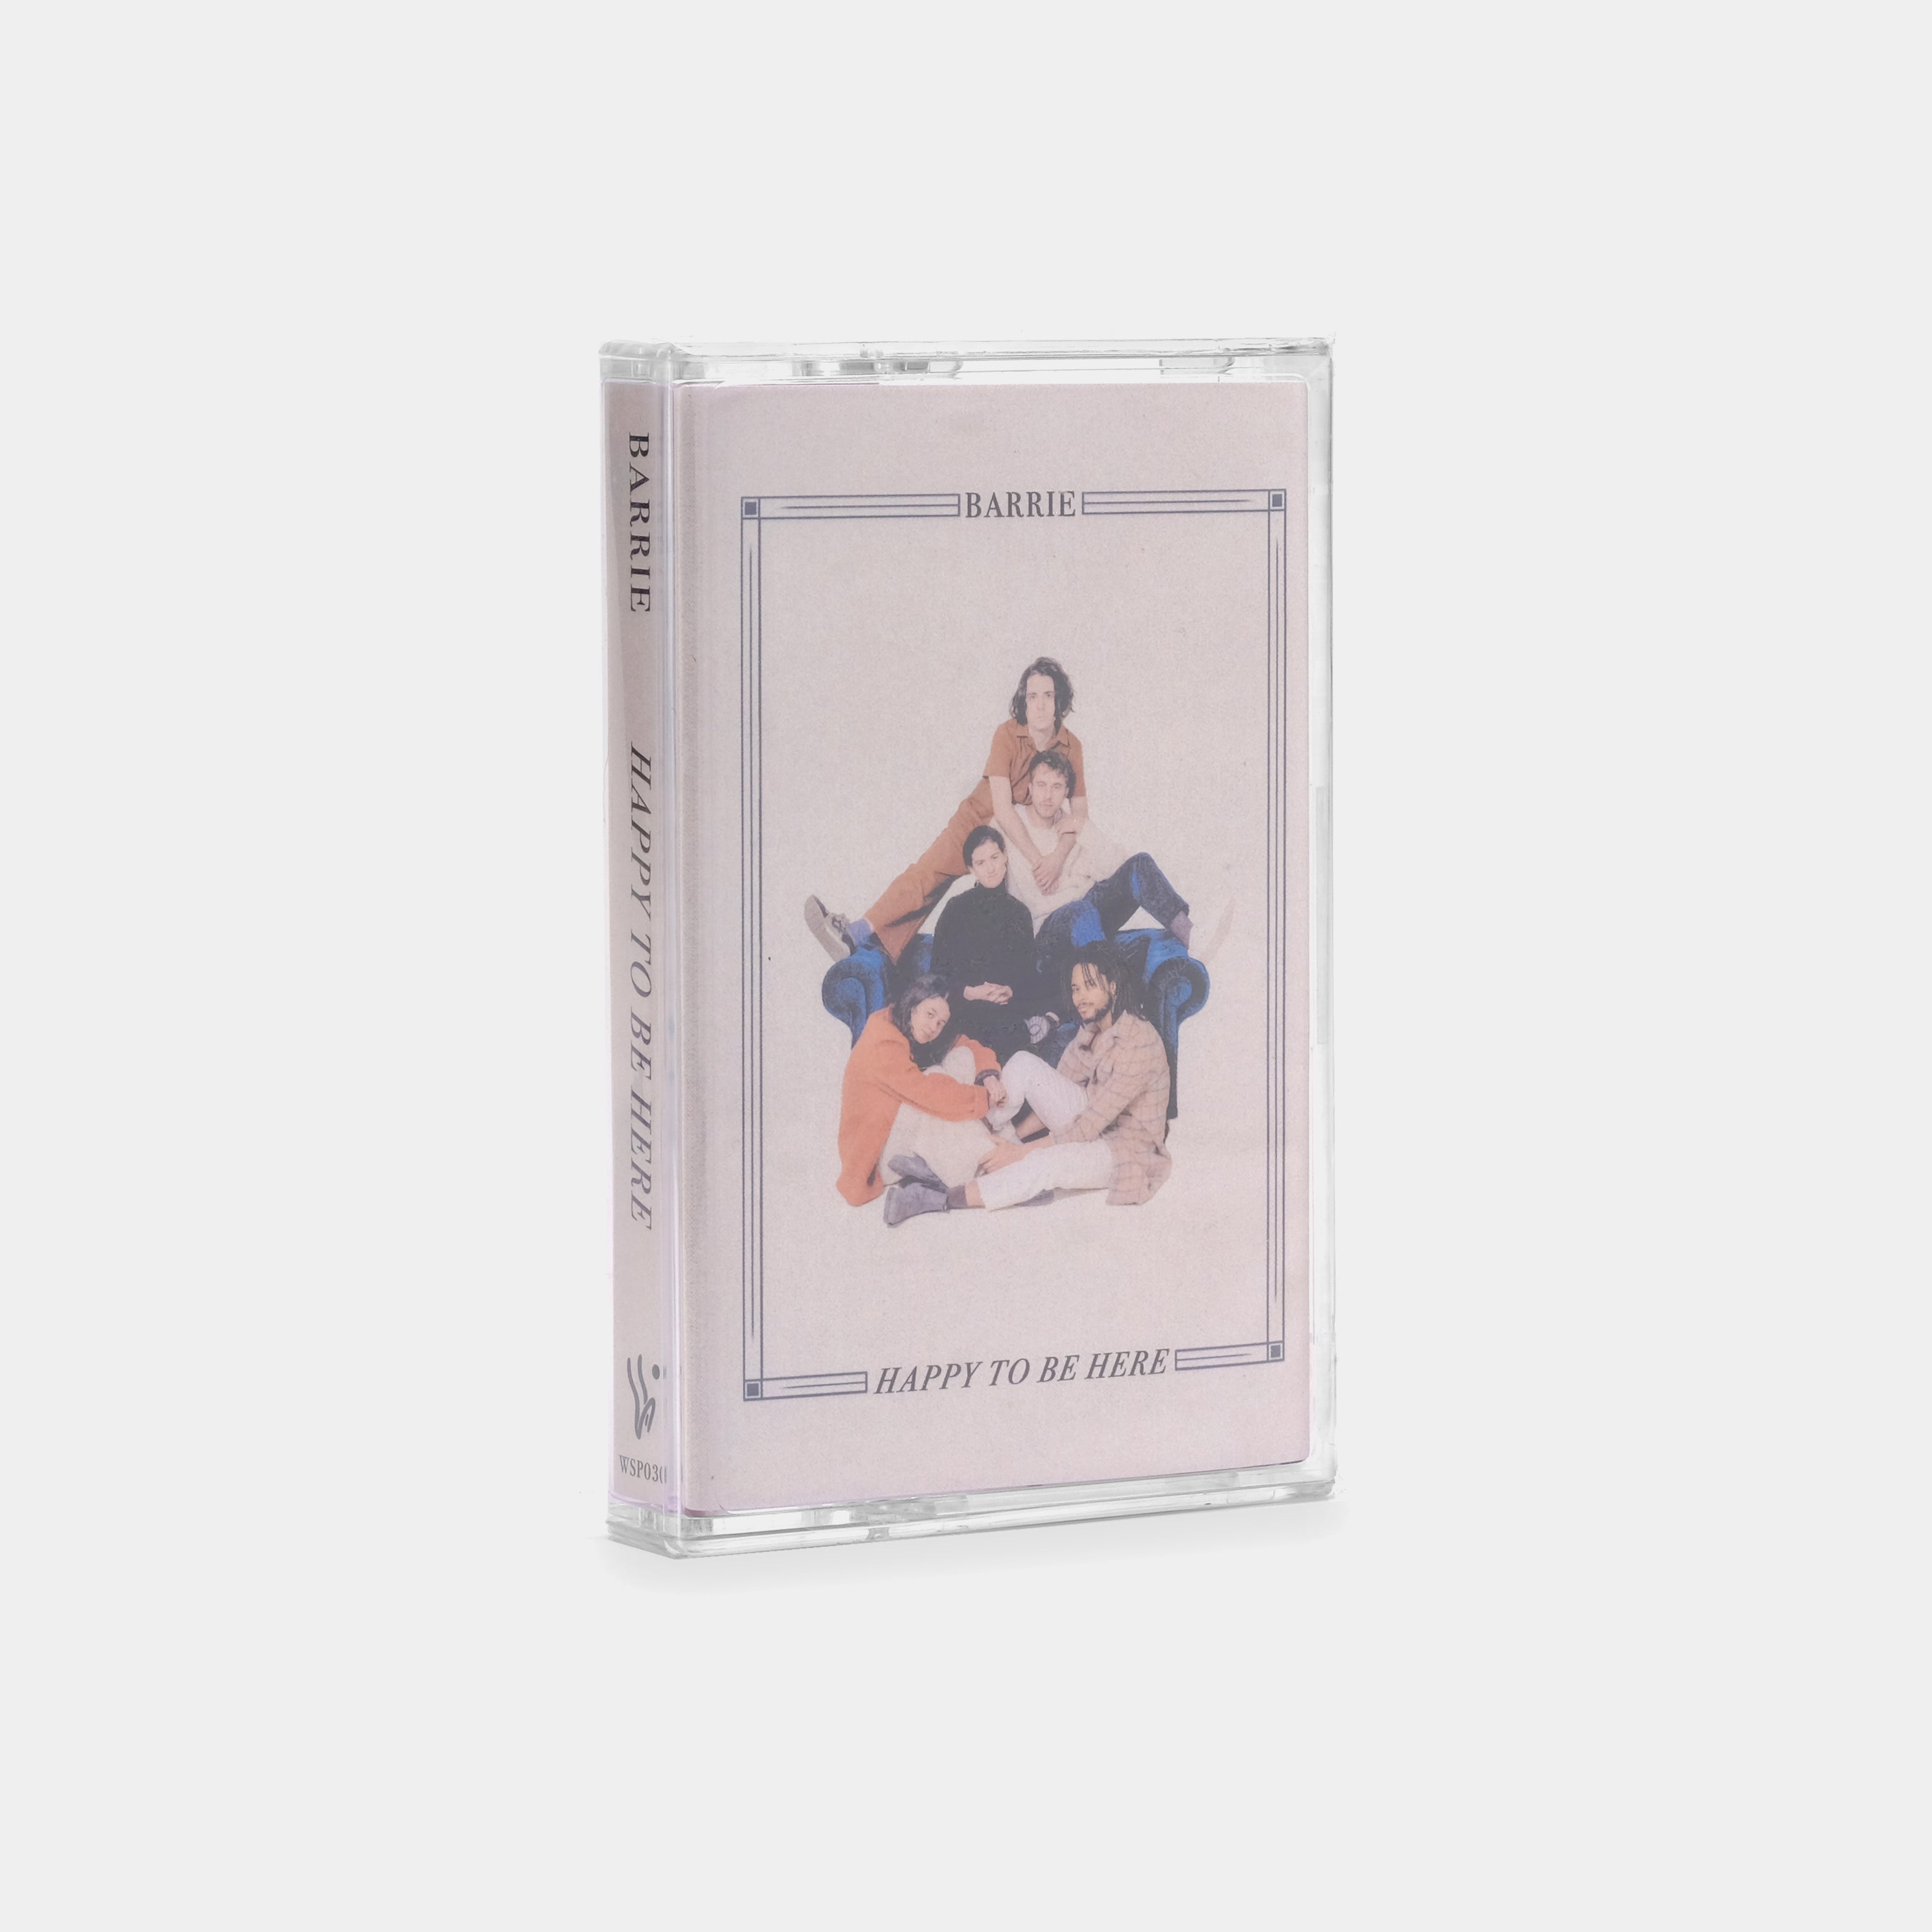 Barrie - Happy To Be Here Cassette Tape